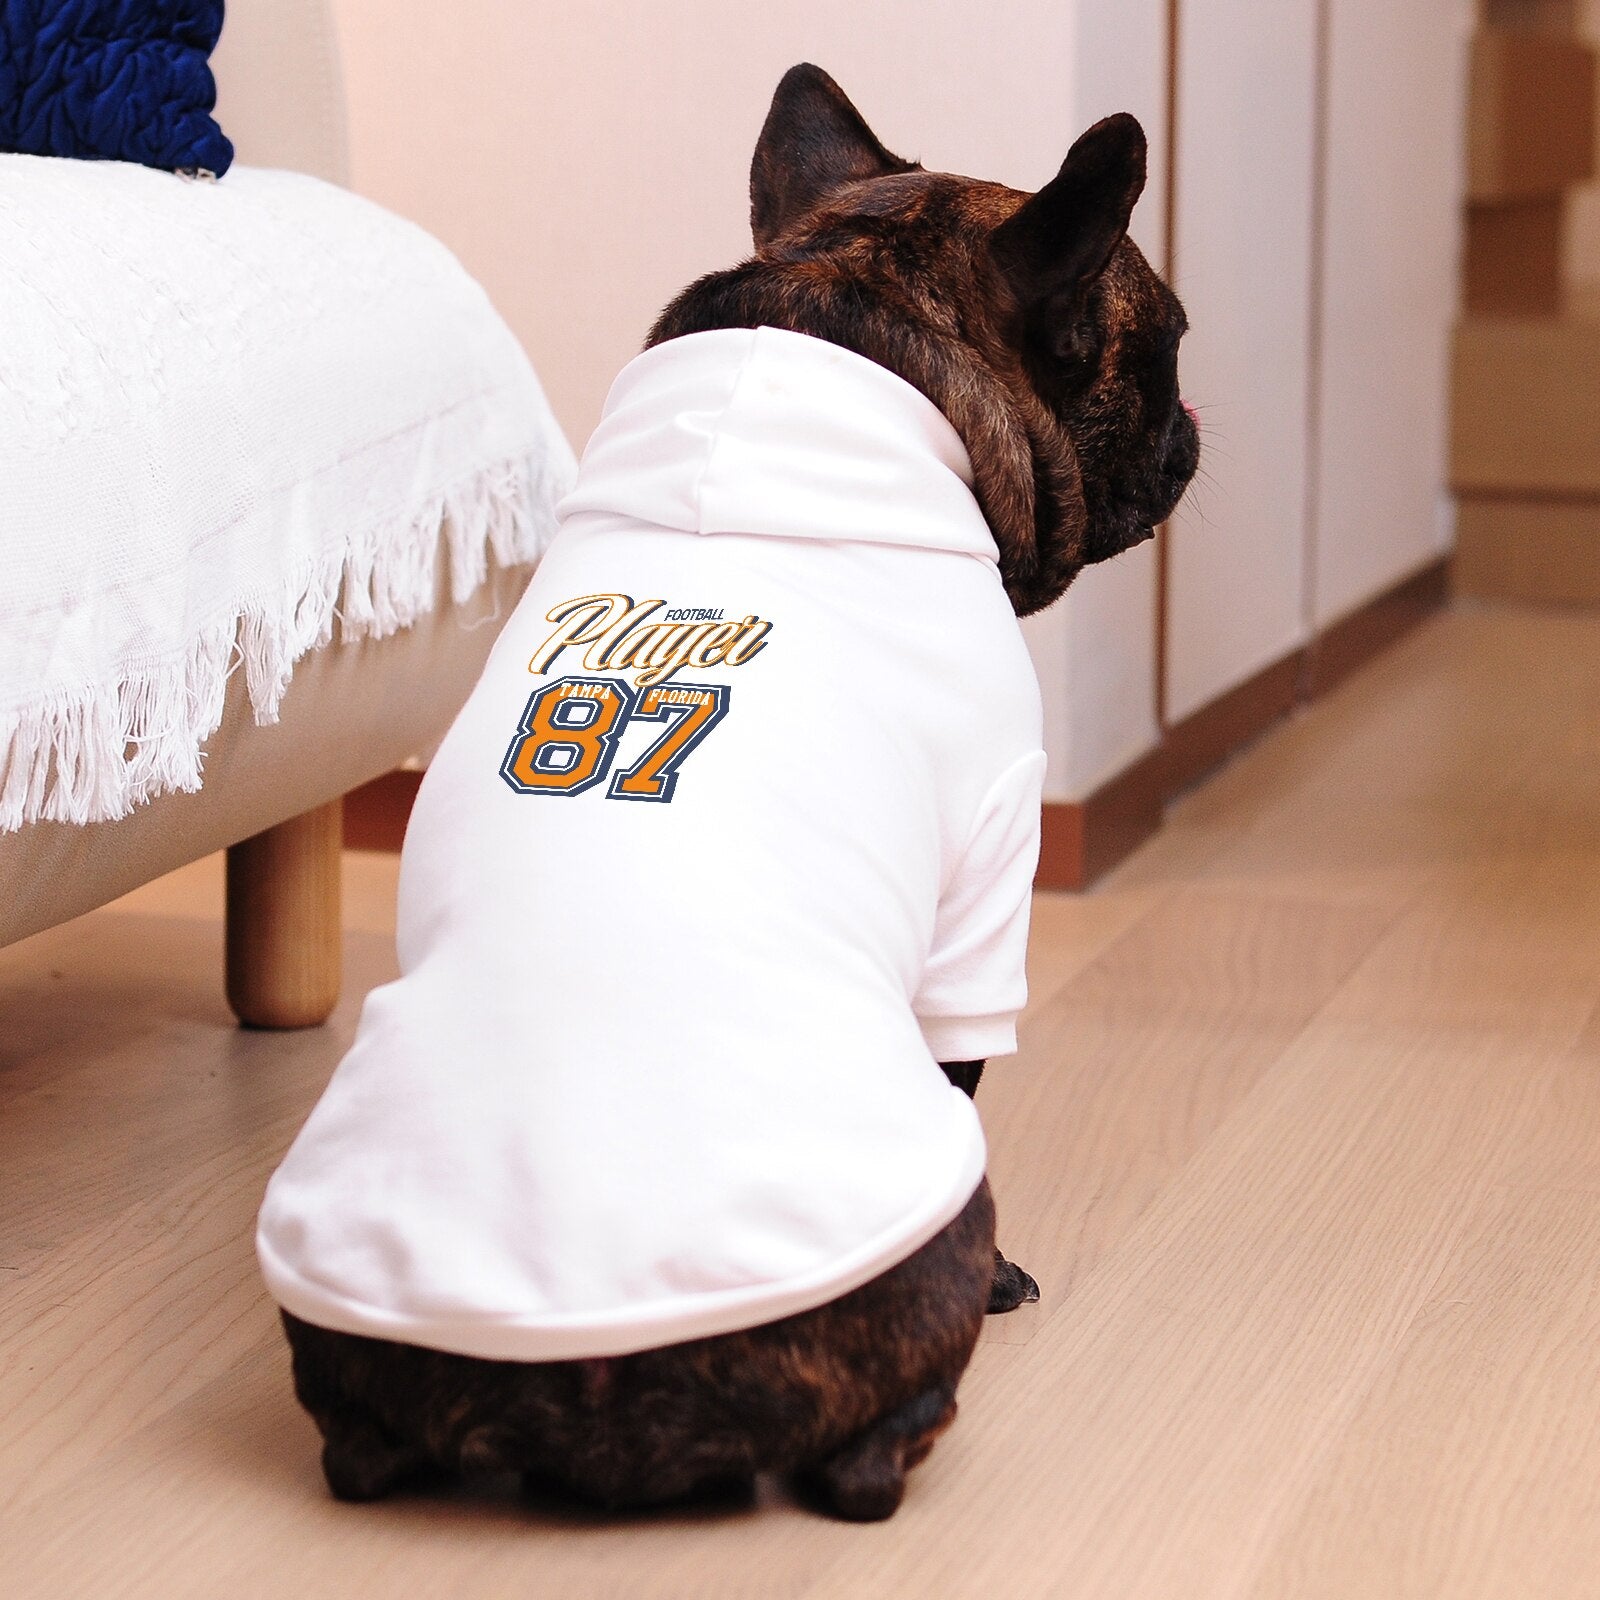 2022 New Pet Clothes Hoodies for Small Dogs Leash Hole Design Breathable Sofe Cotton Fabric Boys Girls